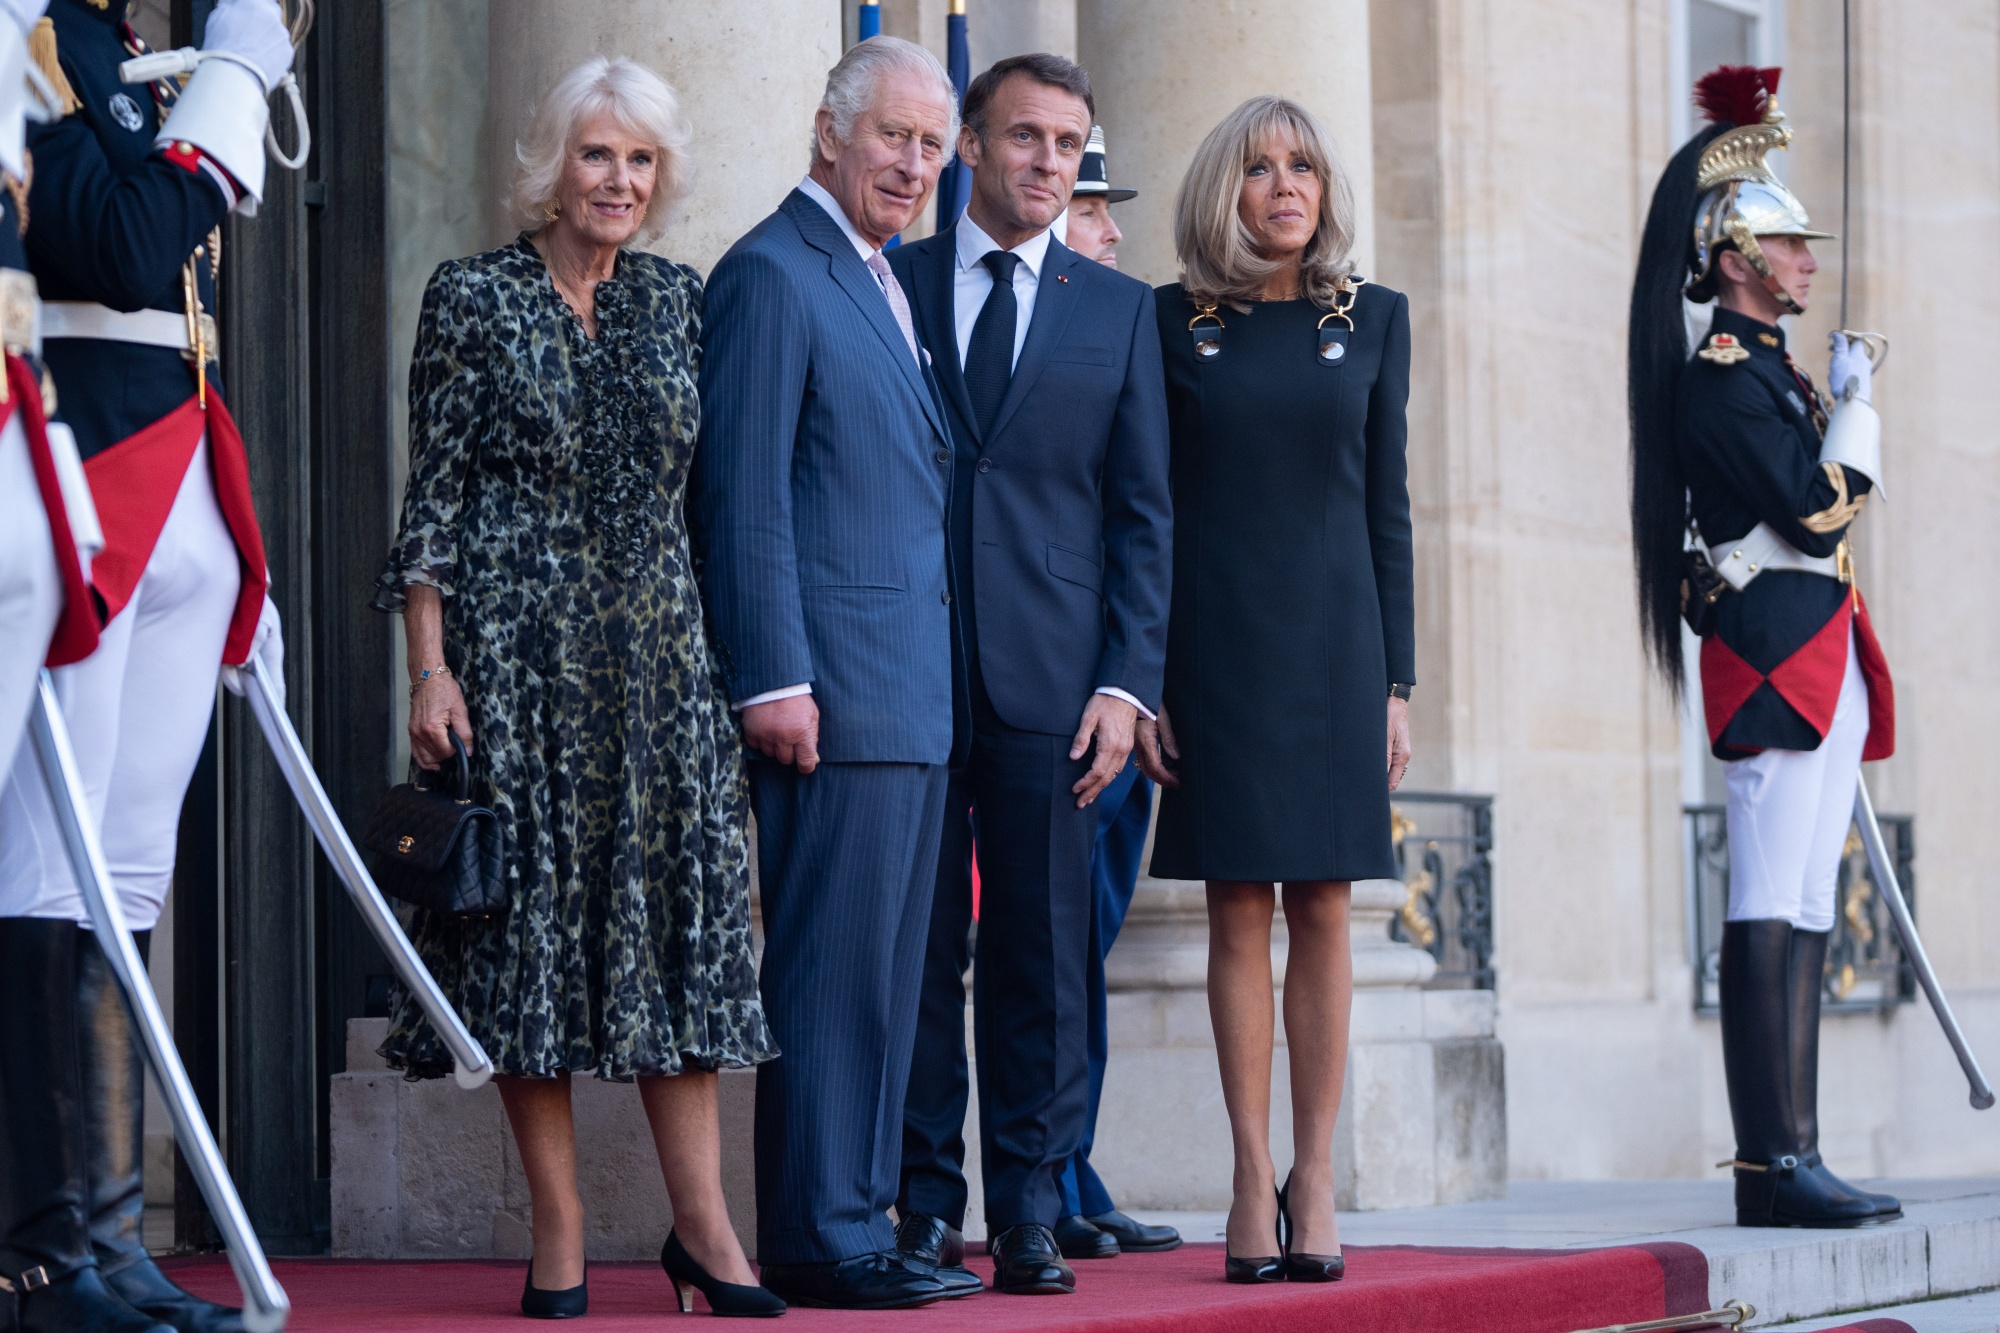 Macron's presidential palace requested LVMH letter: report